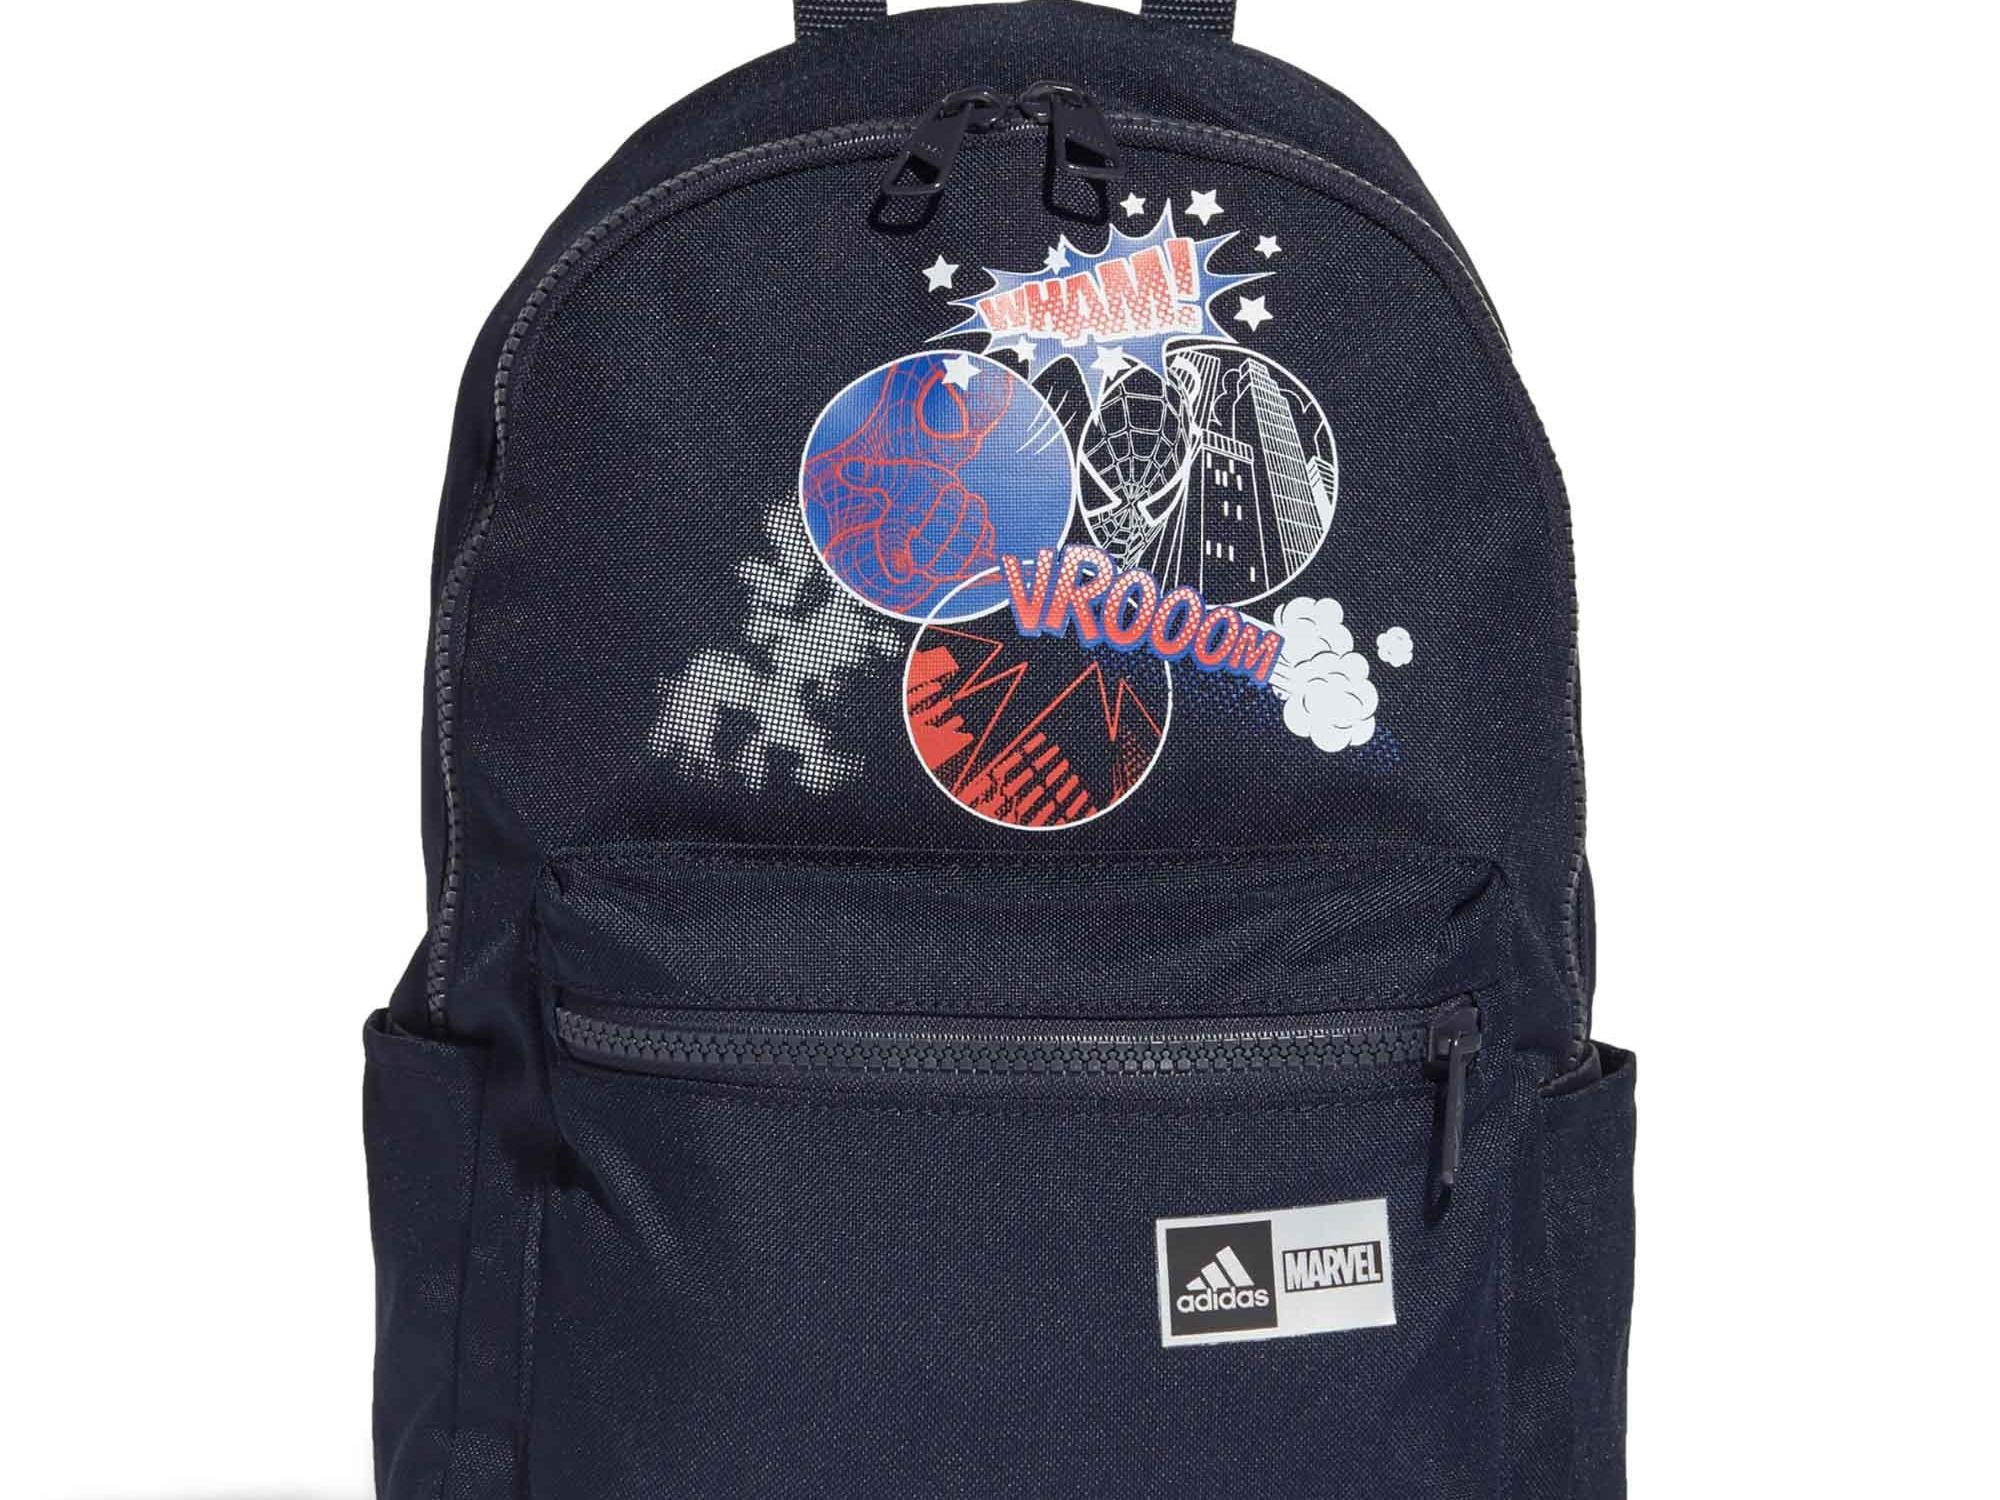 adidas | Graphic Juniors Backpack | Back Packs | Sports MY